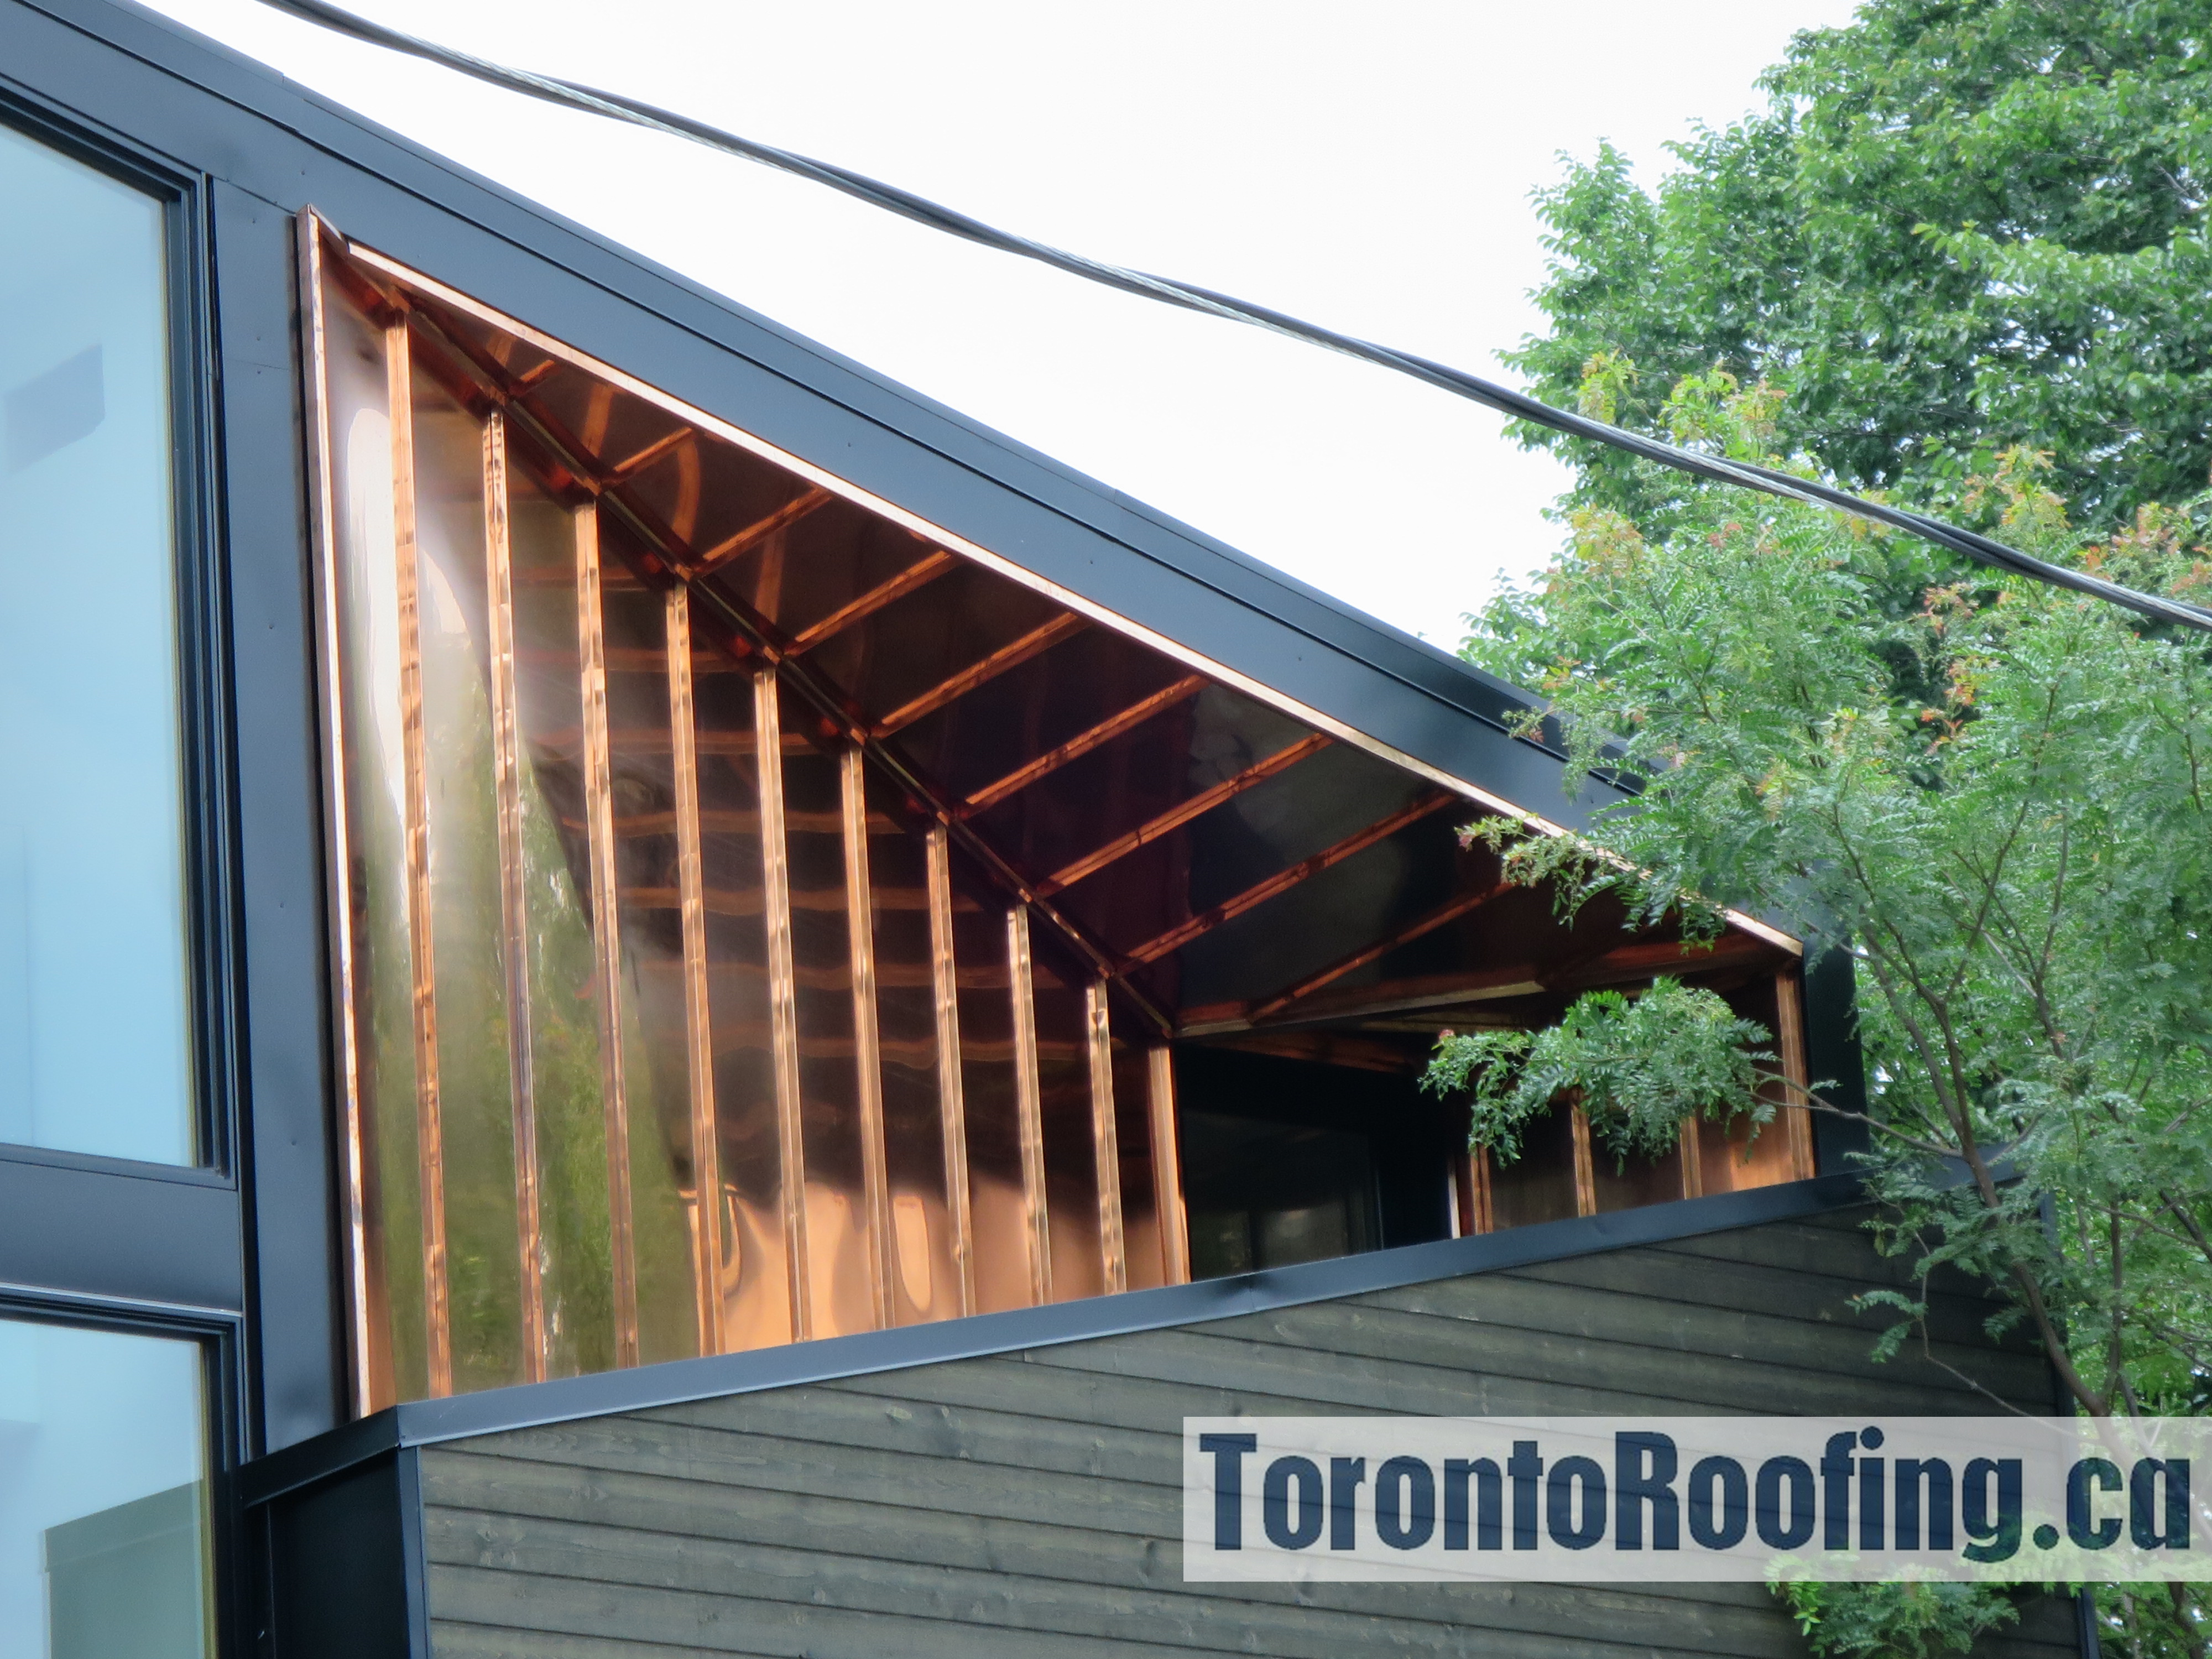 oronto-,roofing,roof,siding,metal,copper,wood,modern,homes,aluminum,cladding,architecture,building,contractor,exterior,